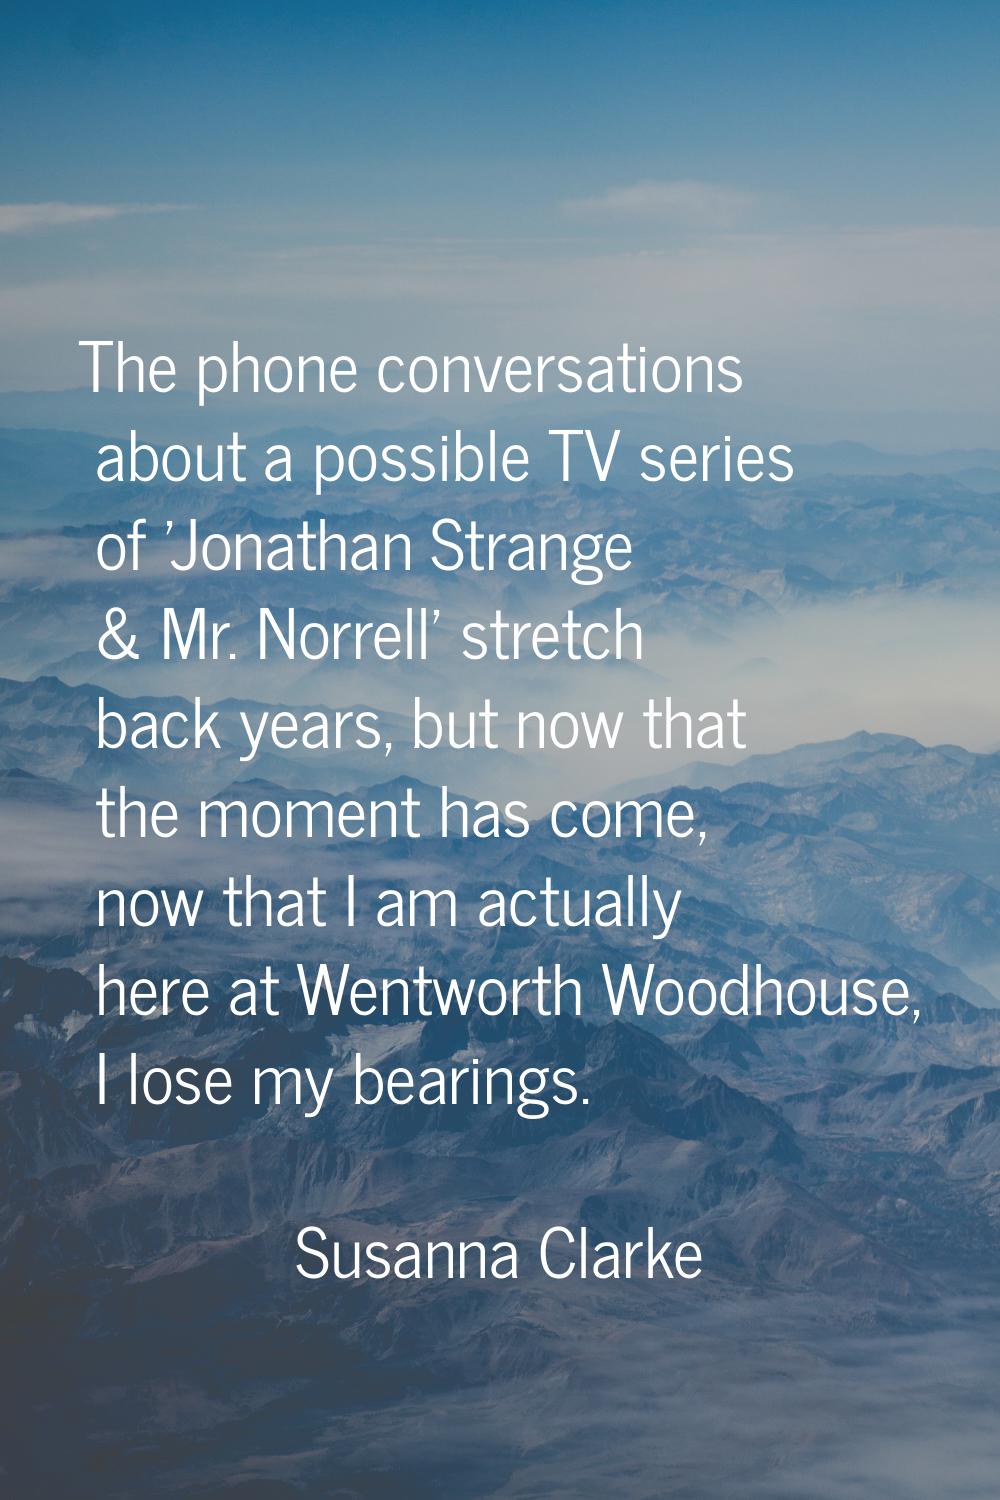 The phone conversations about a possible TV series of 'Jonathan Strange & Mr. Norrell' stretch back